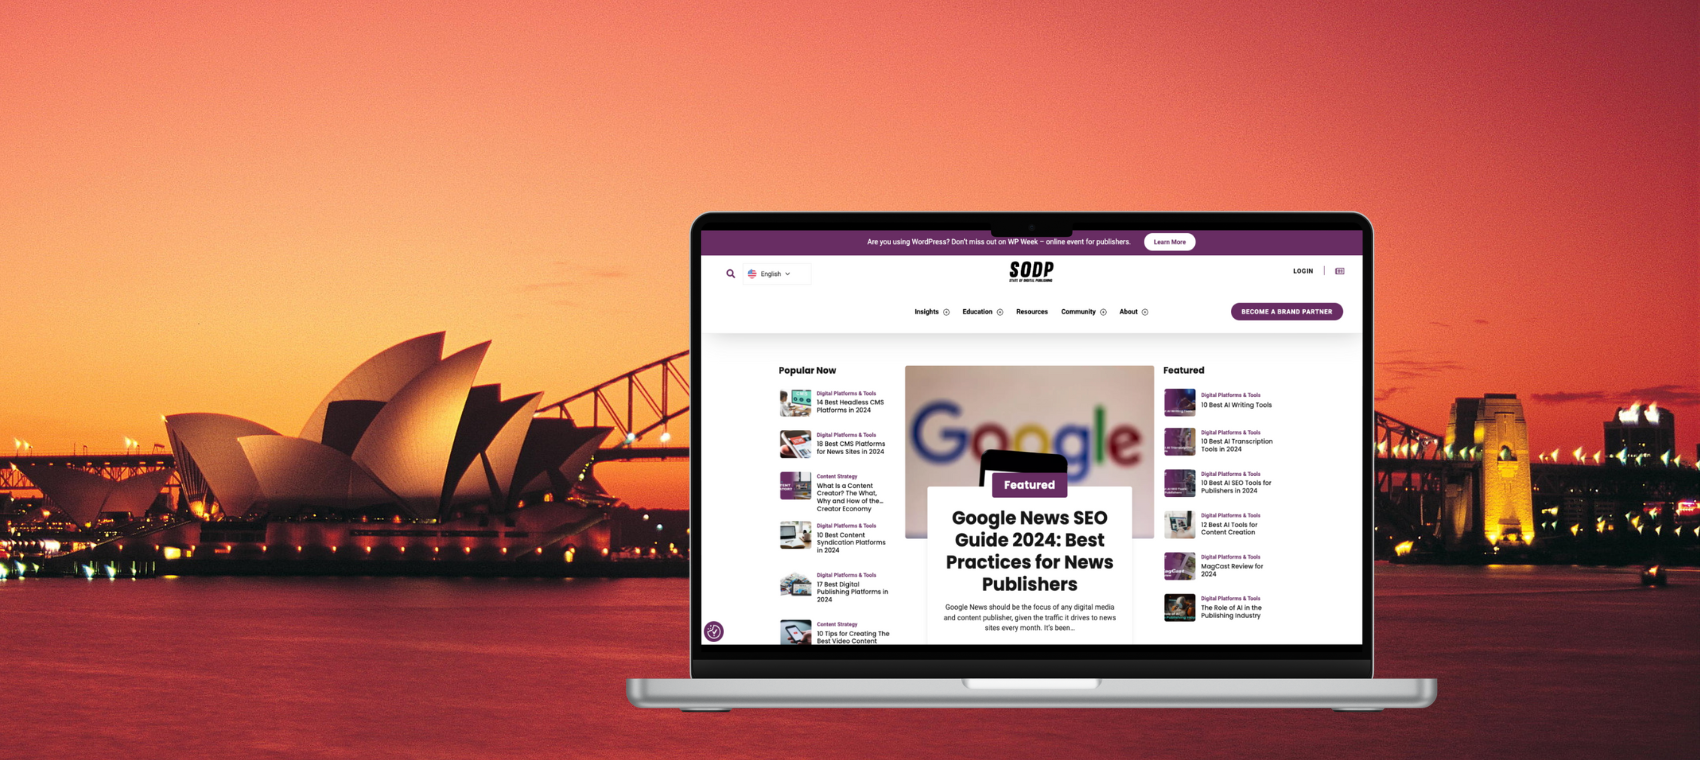 What’s up Down Under: Vahe Arabian, the founder of State of Digital Publishing, shares his thoughts on the fast-changing media landscape in Australia